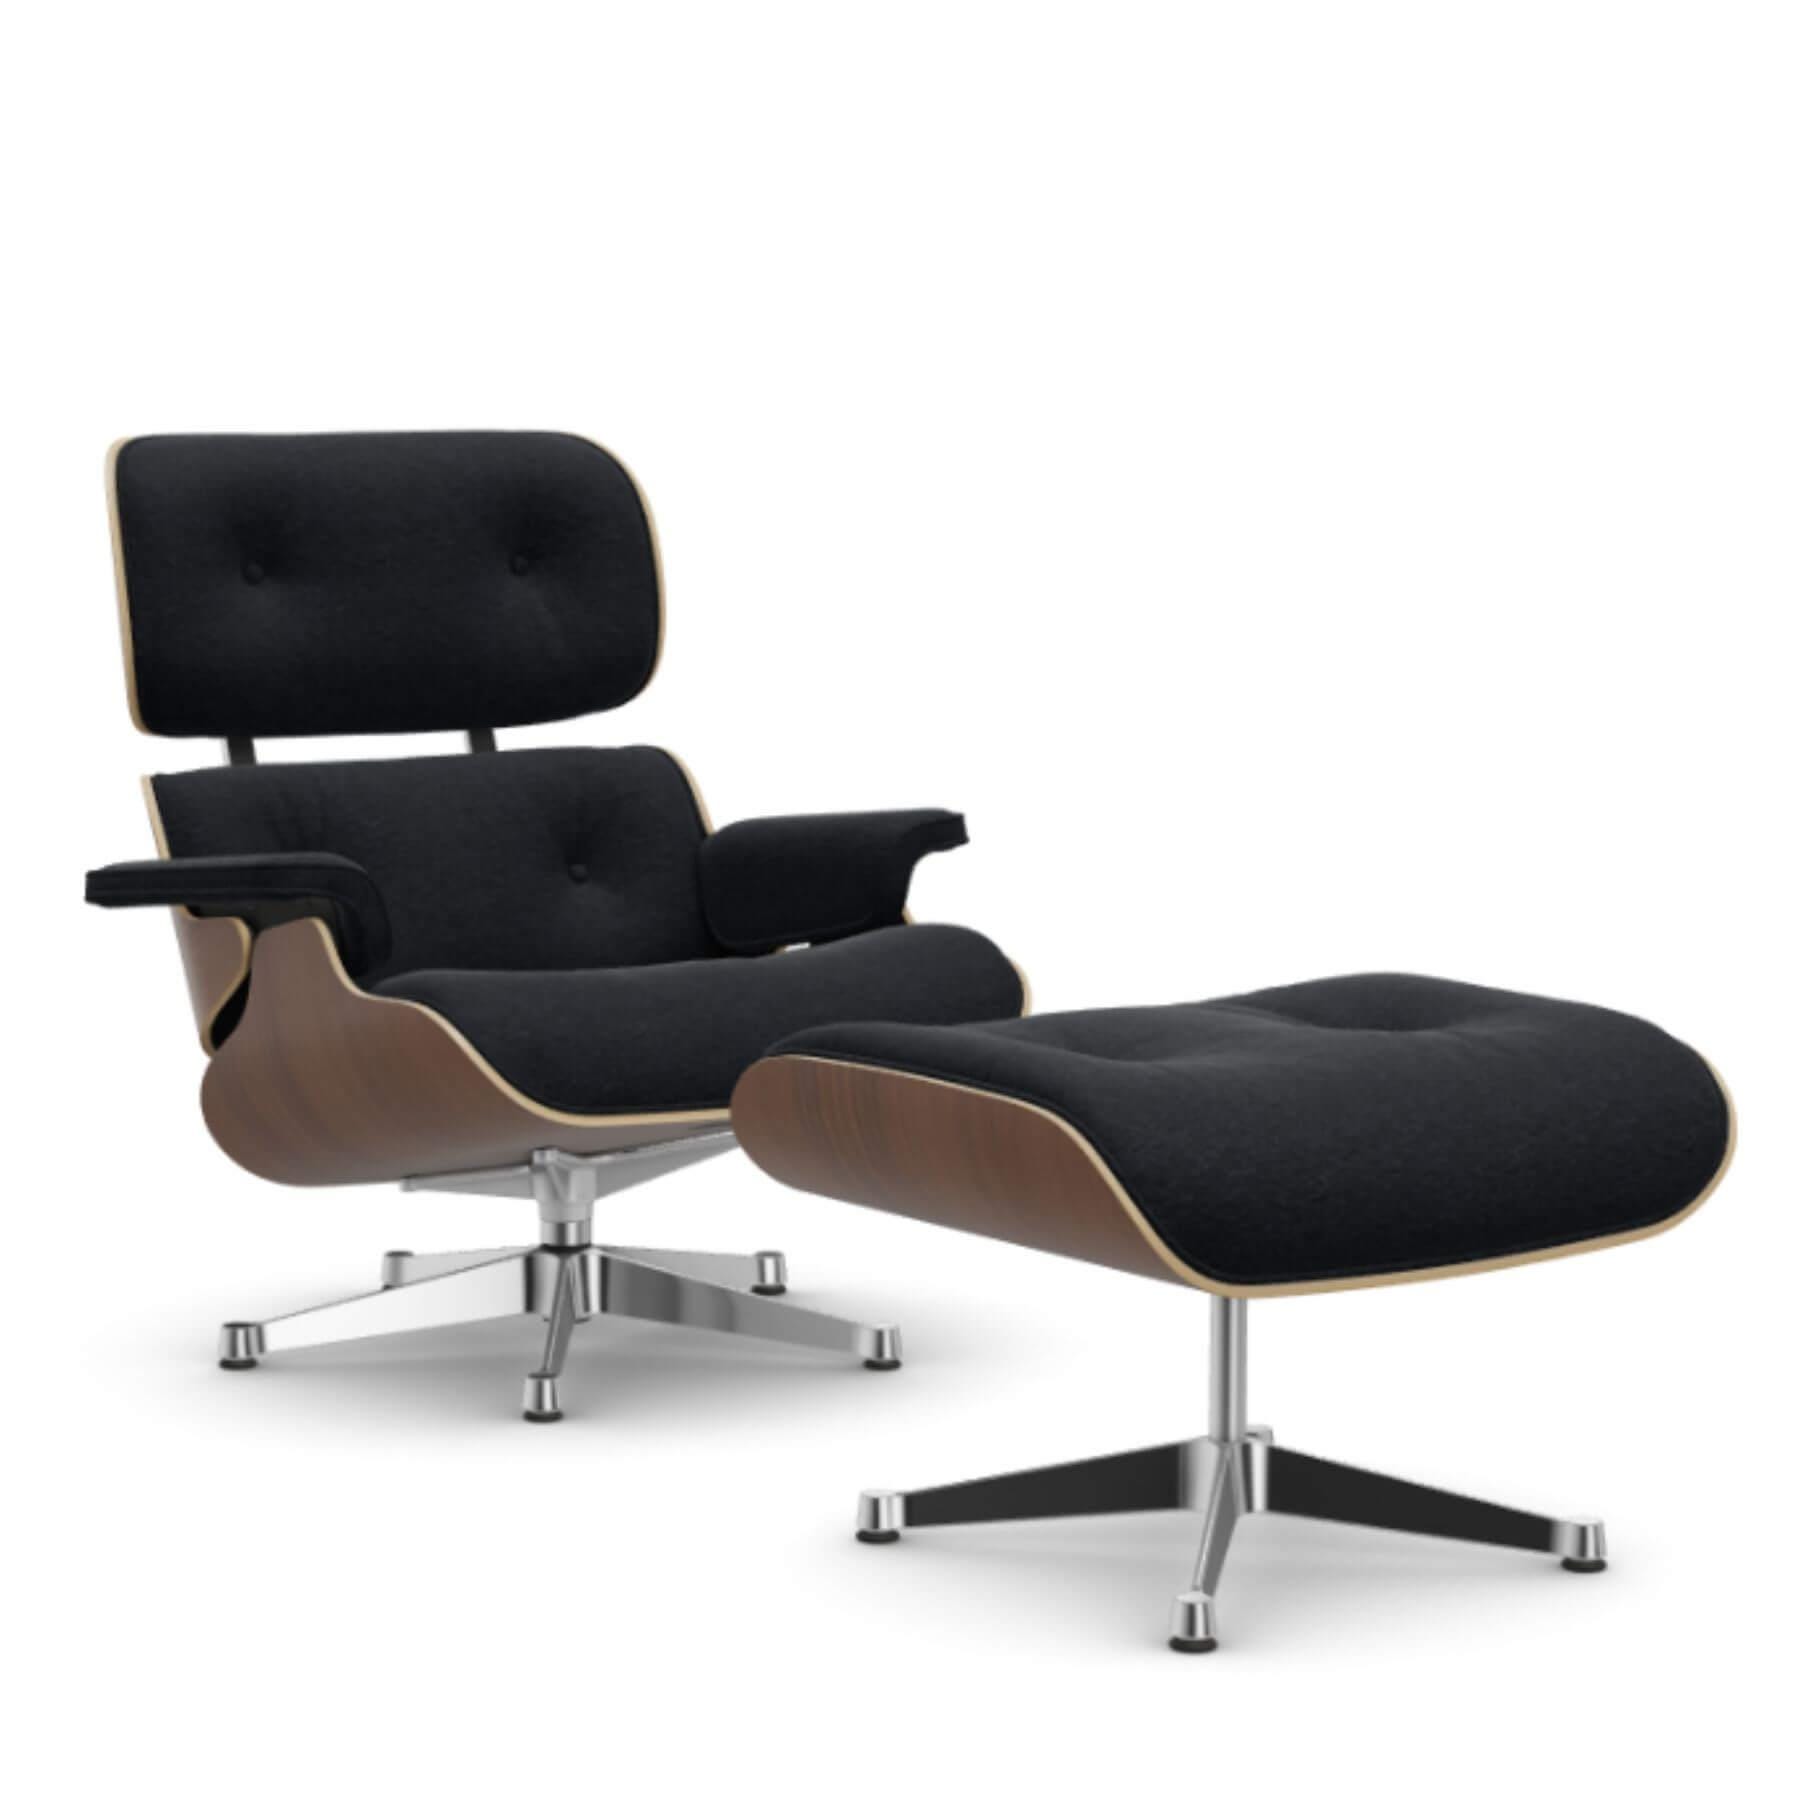 Vitra Eames Lounge Chair Black Pigmented Walnut Nubia Black Anthracite Polished Aluminium With Ottoman Dark Wood Designer Furniture From Holloways